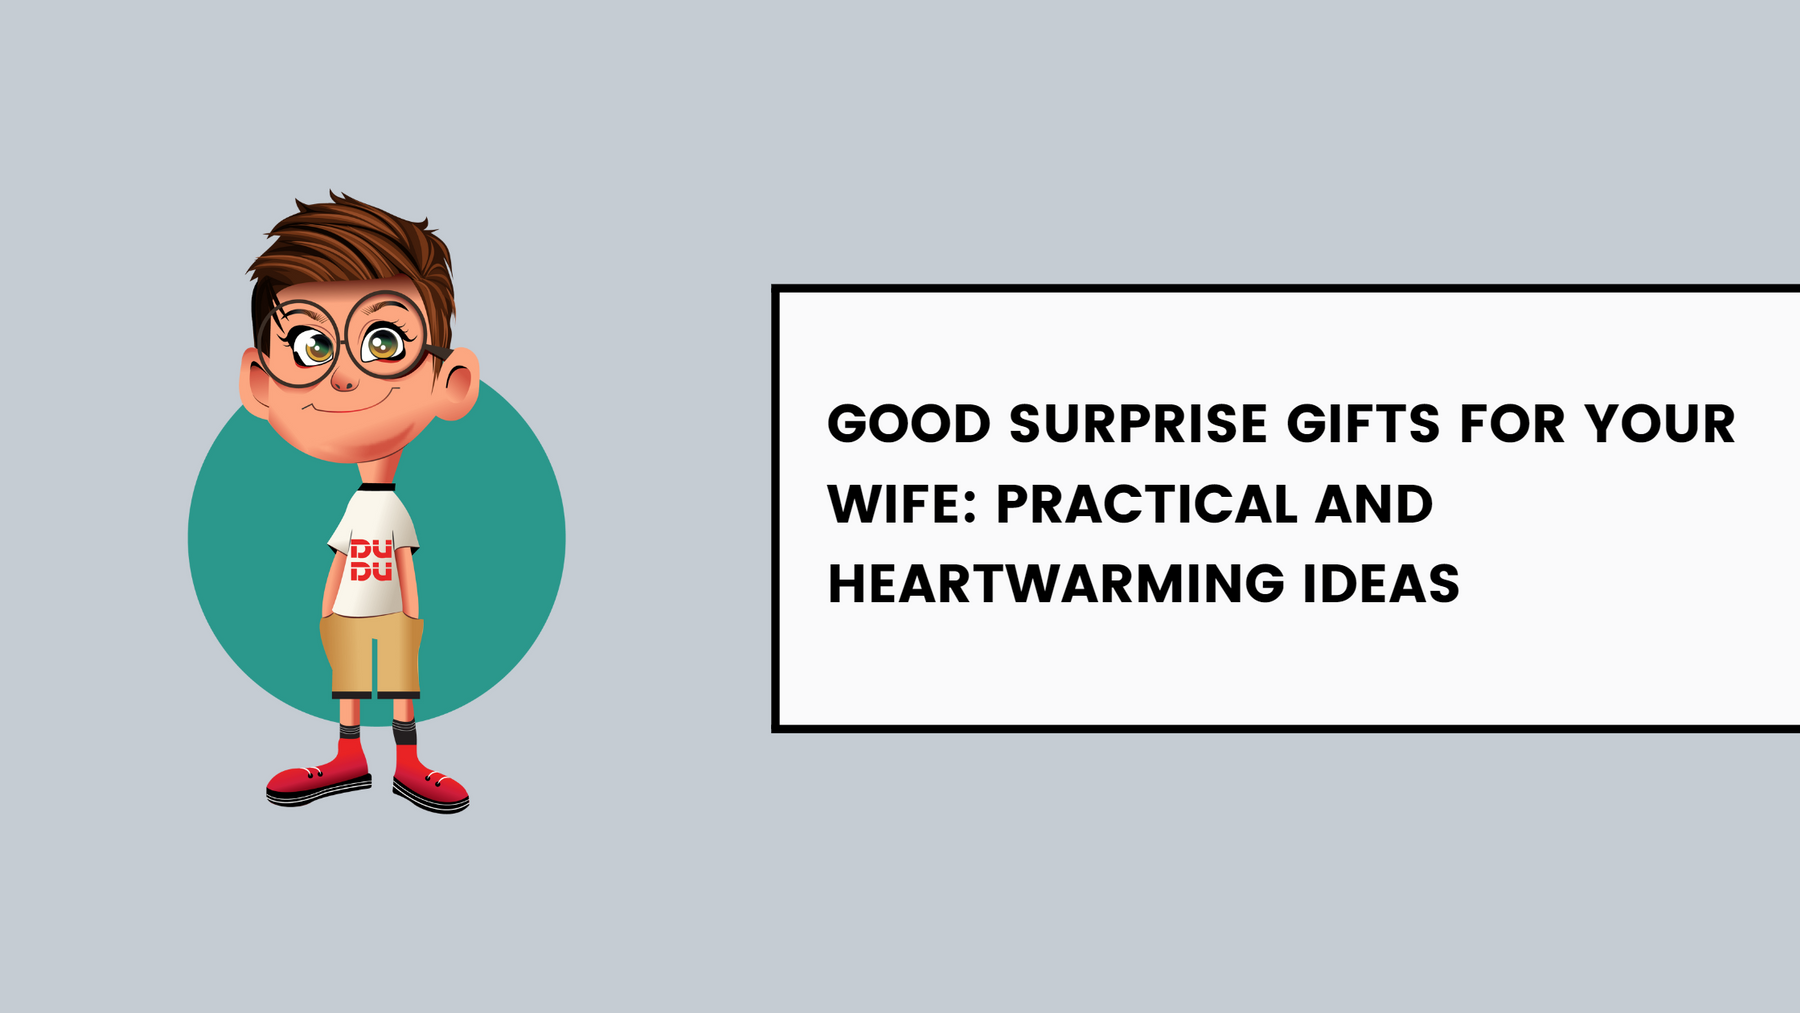 Good Surprise Gifts For Your Wife: Practical And Heartwarming Ideas